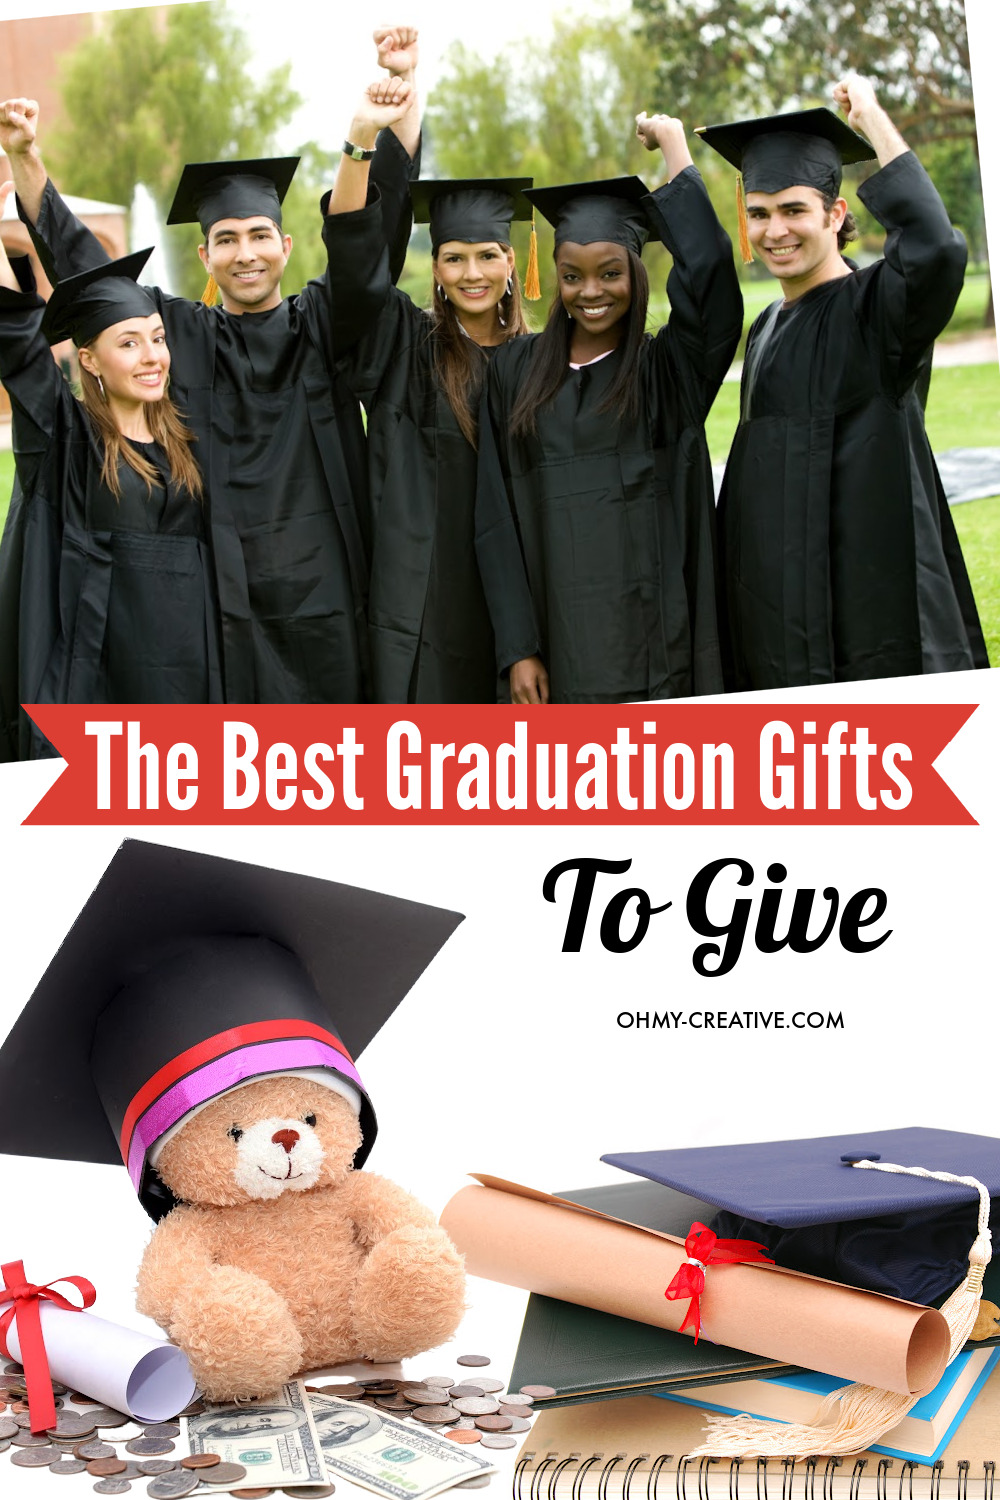 A collage of graduation gift ideas while a group of grads cheering and celebrating graduation!